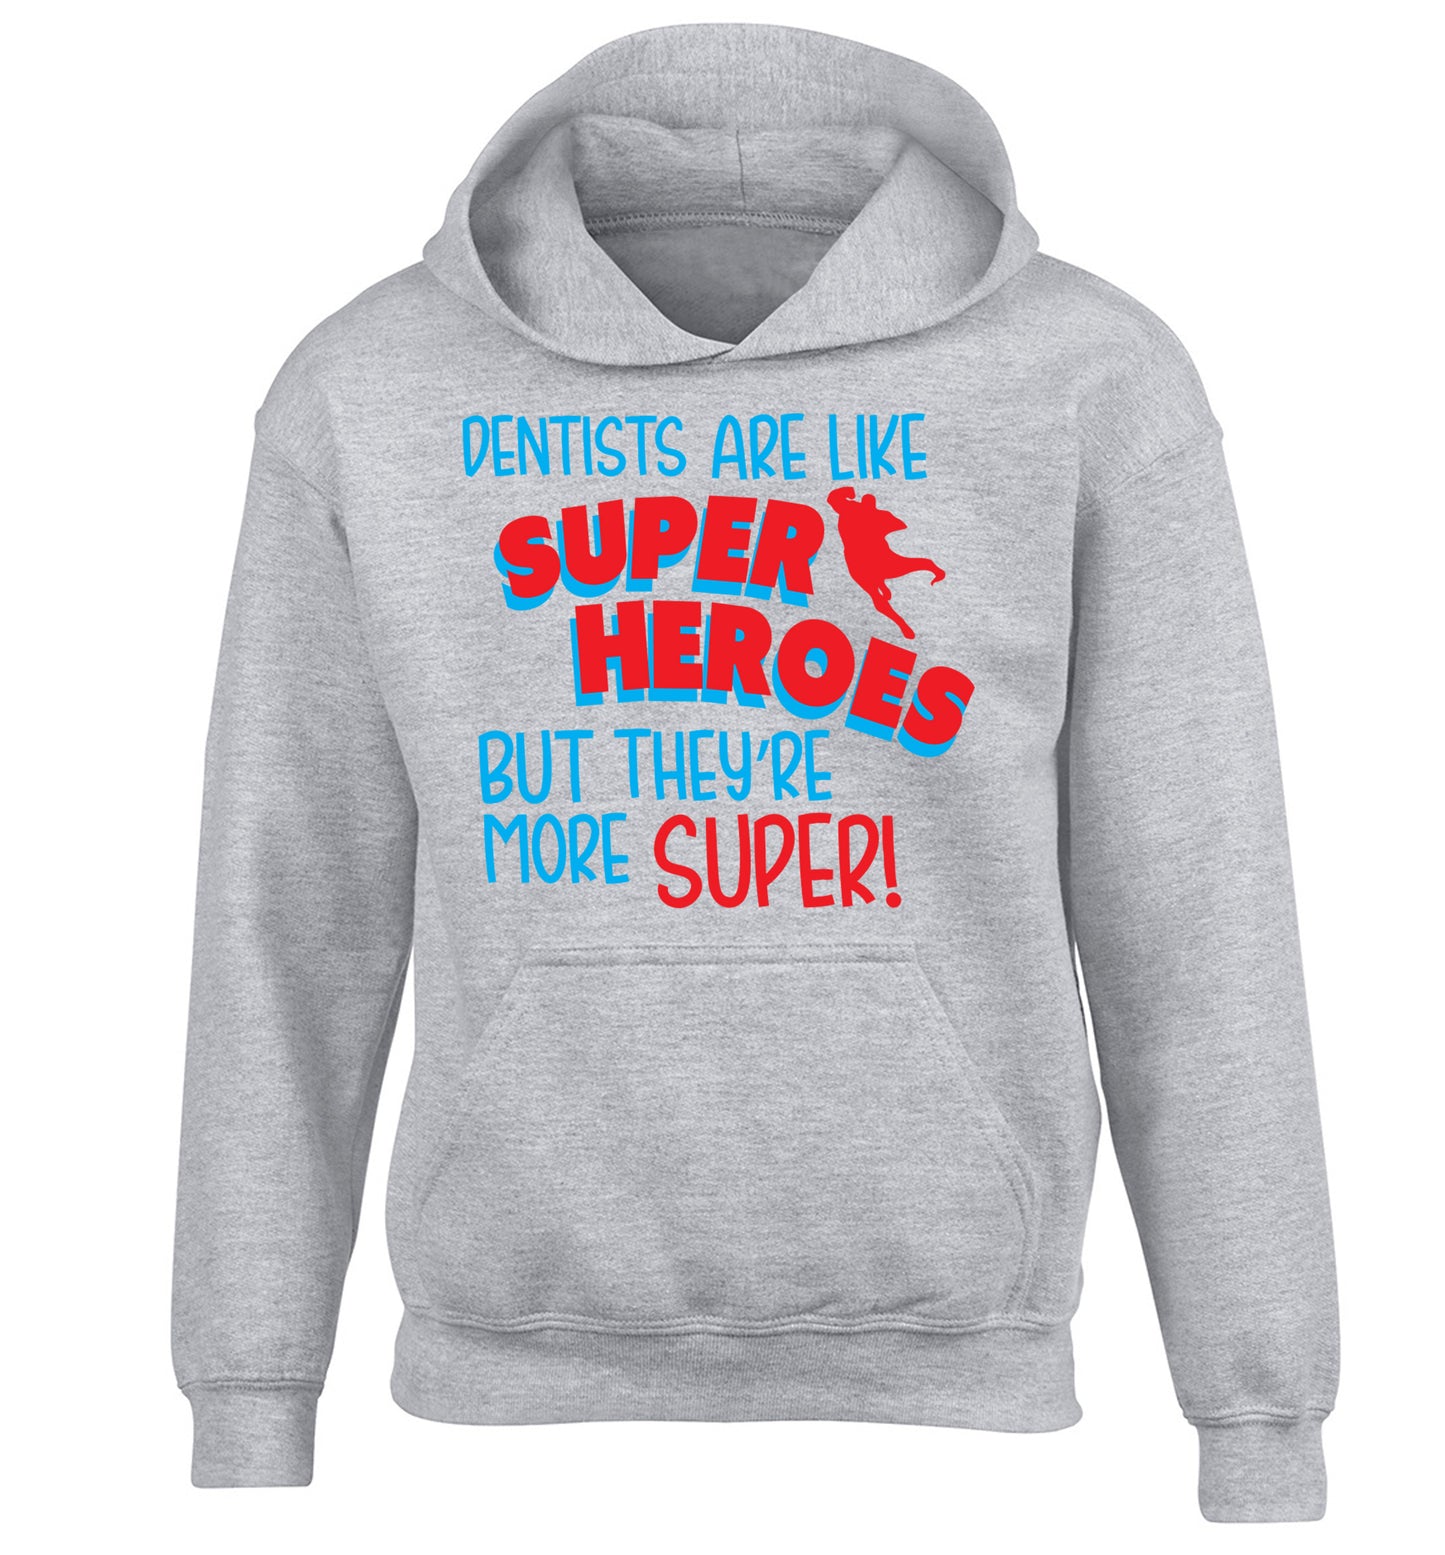 Dentists are like superheros but they're more super children's grey hoodie 12-13 Years